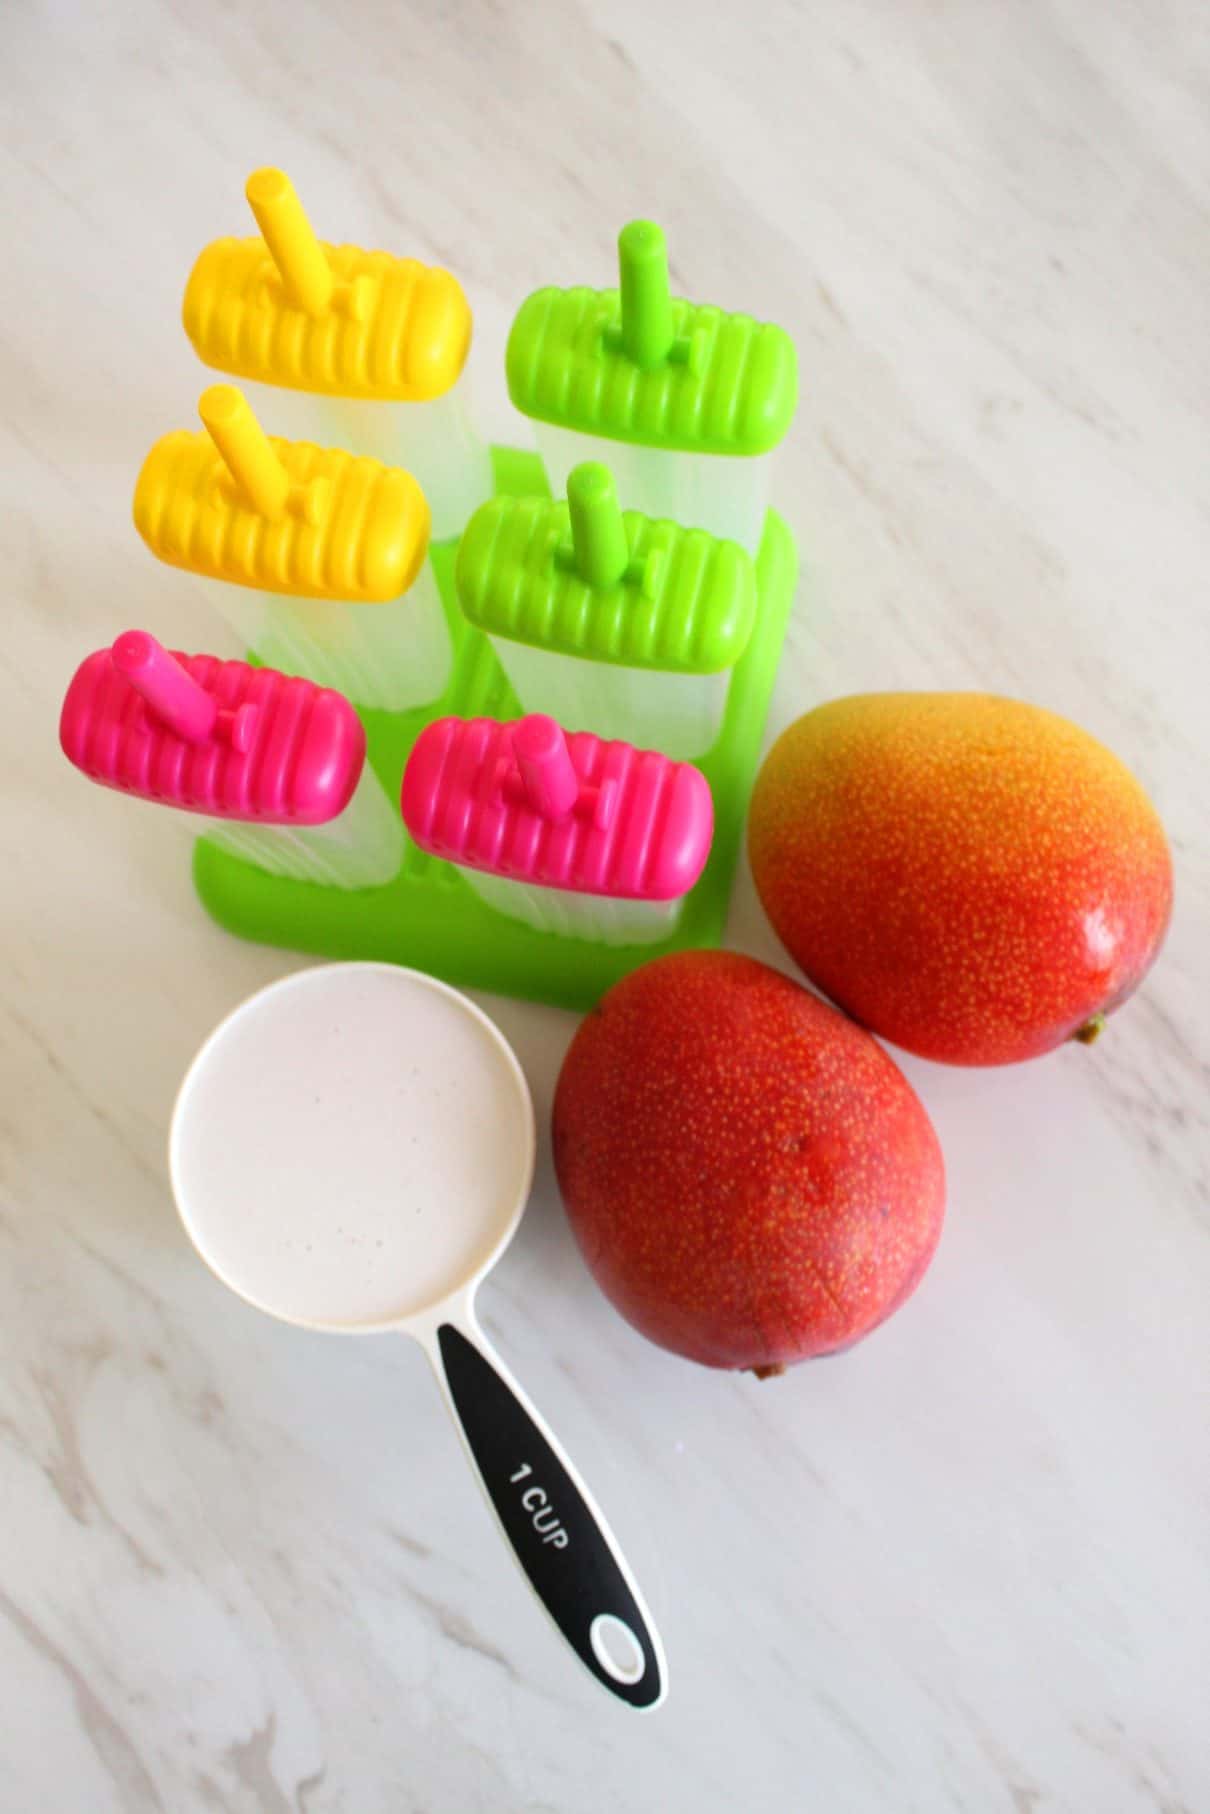 2 big size mangoes, a cup of coconut milks and molds for popsicles are laid out.